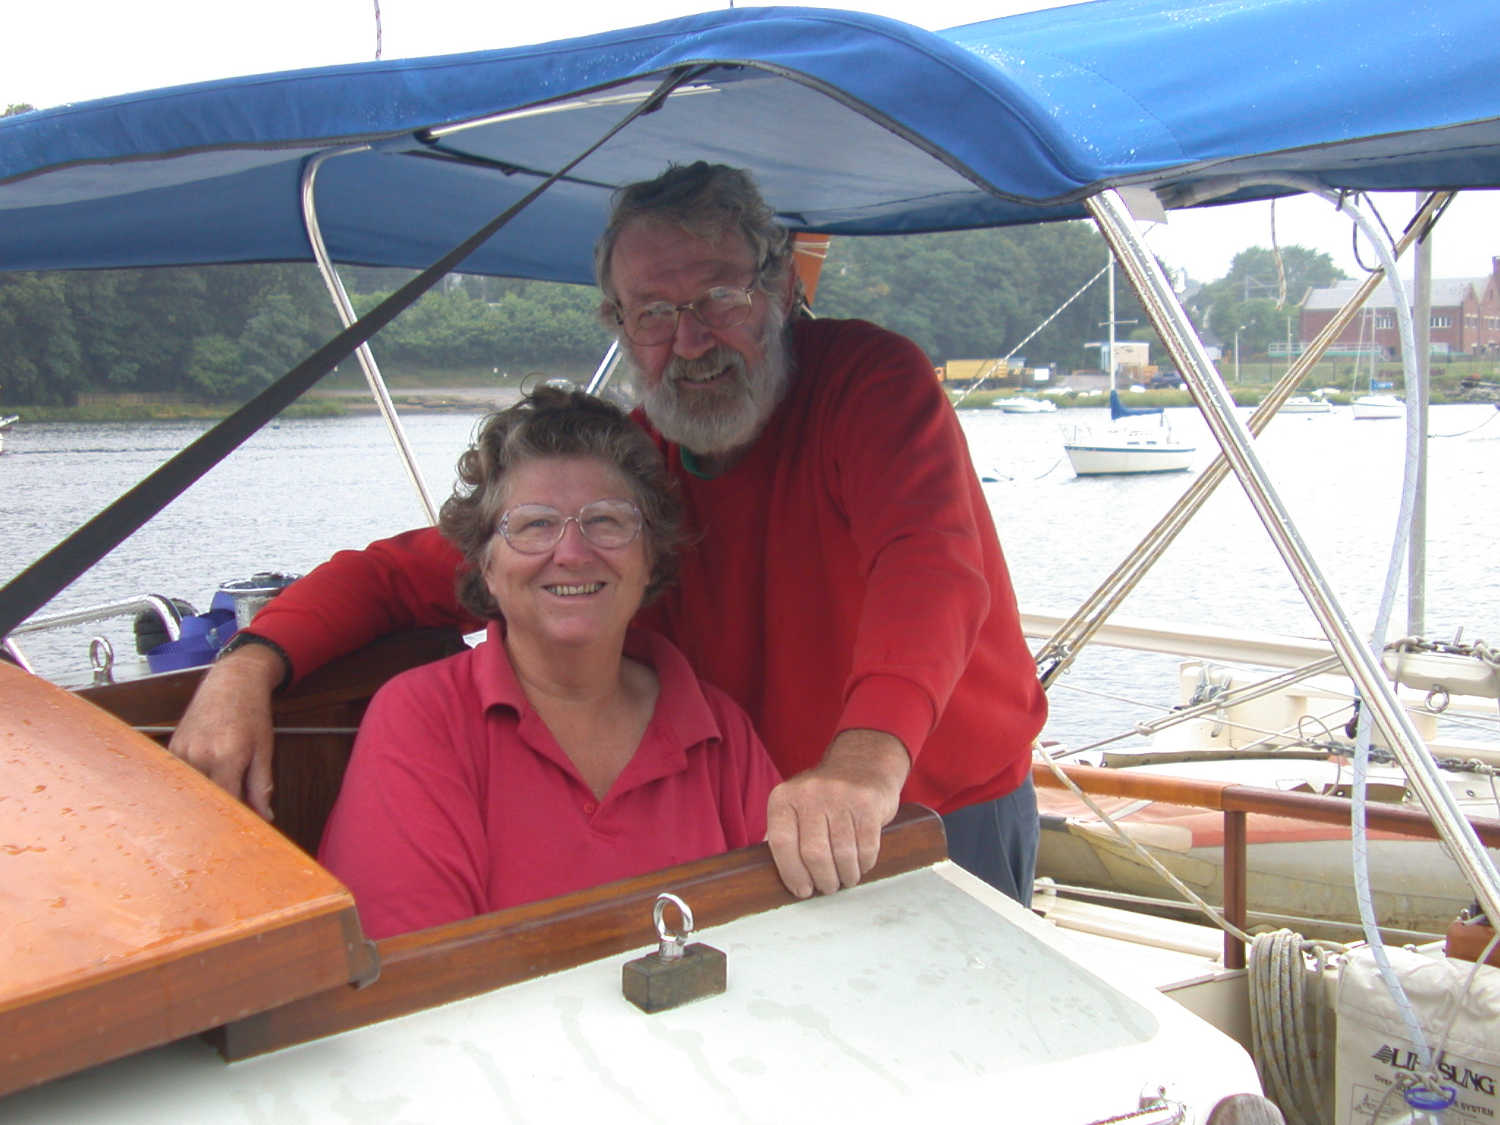 Two people in a boat cockpit, under a canopy